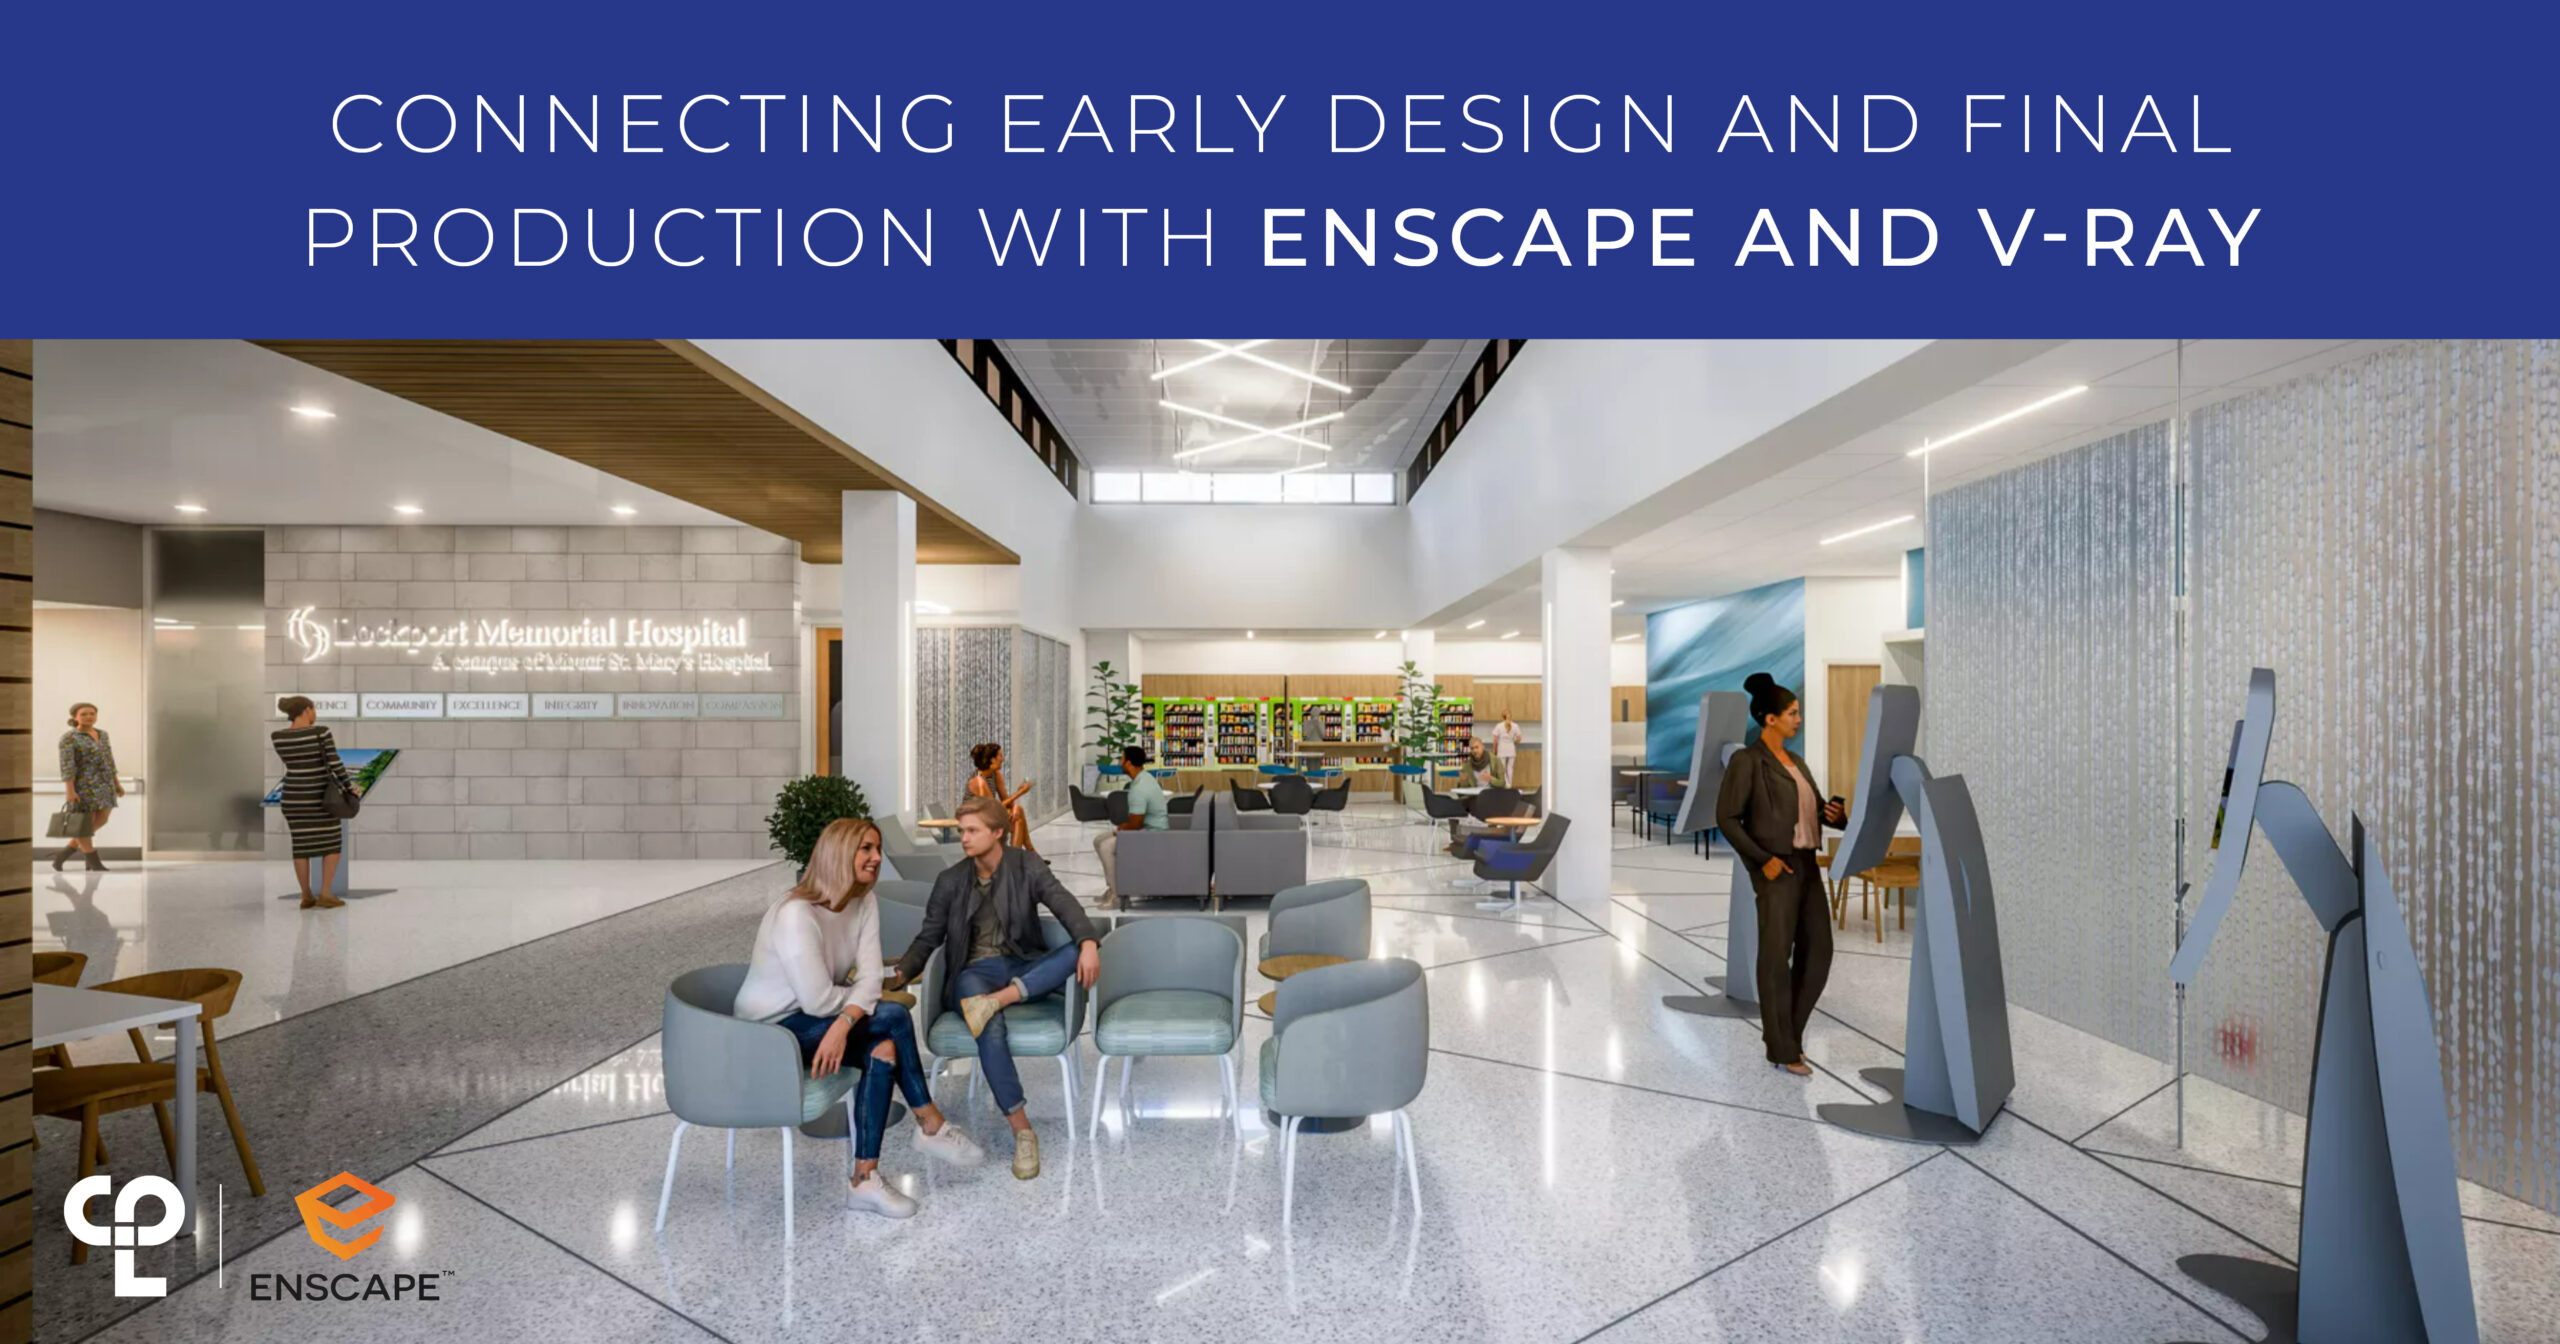 Connecting Early Design and Final Production with Enscape and V-Ray with rendering of hospital underneath